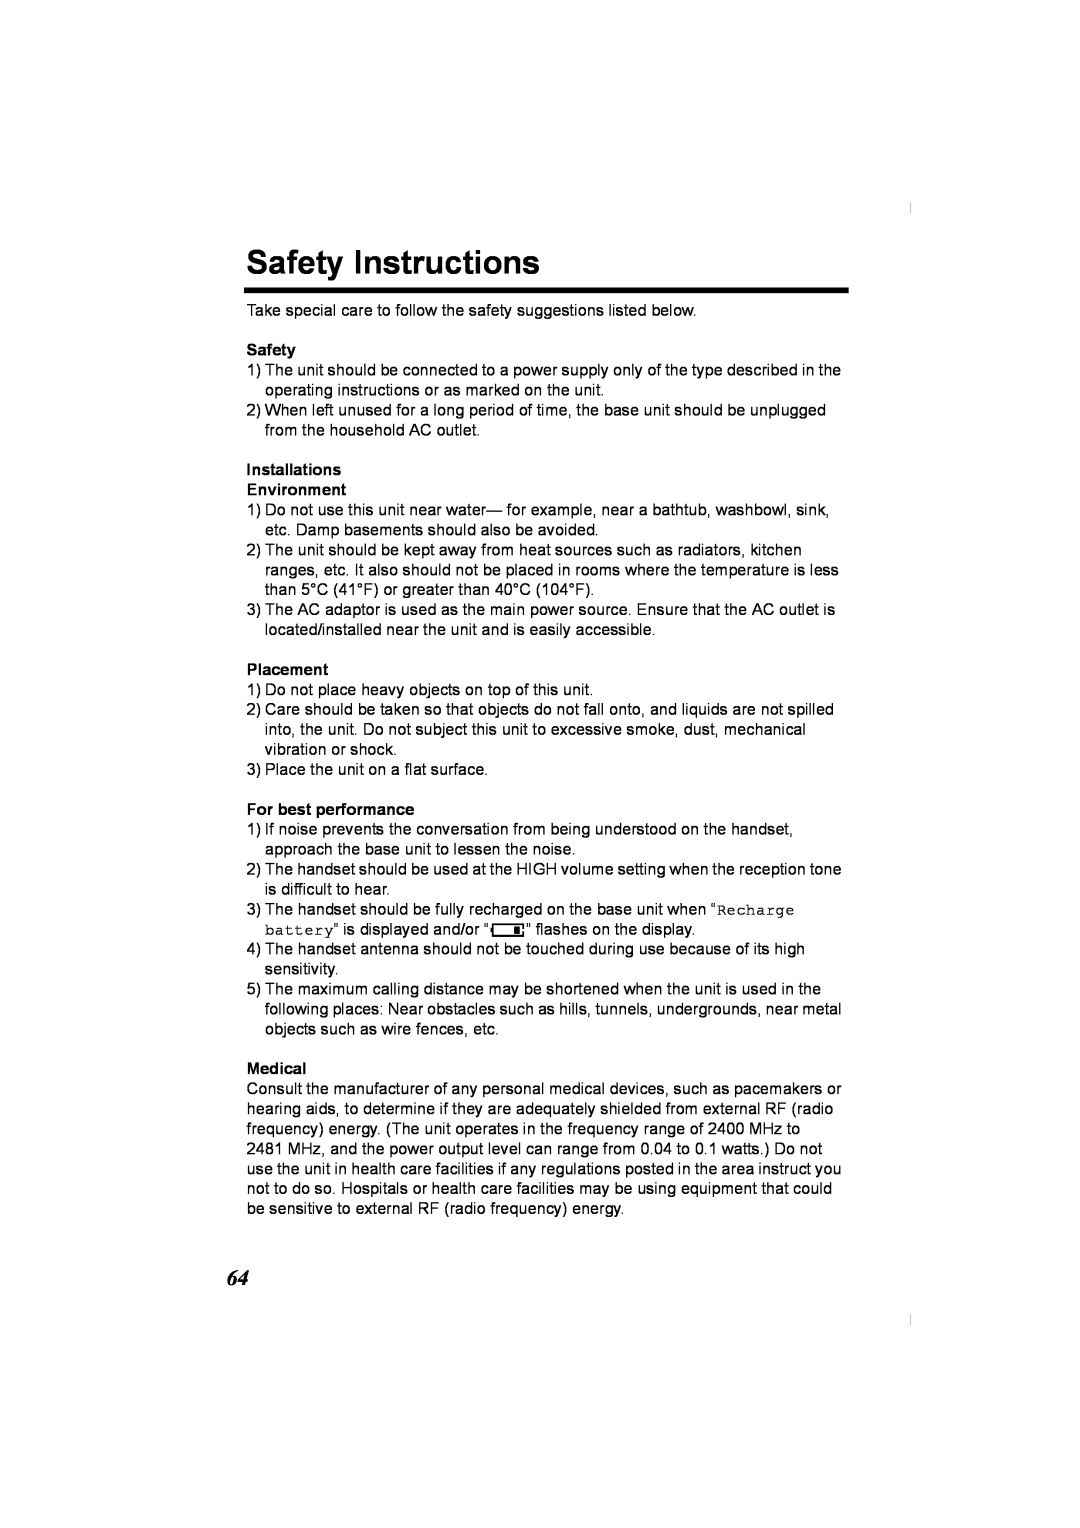 Panasonic KX-TG2336C Safety Instructions, Installations Environment, Placement, For best performance, Medical 